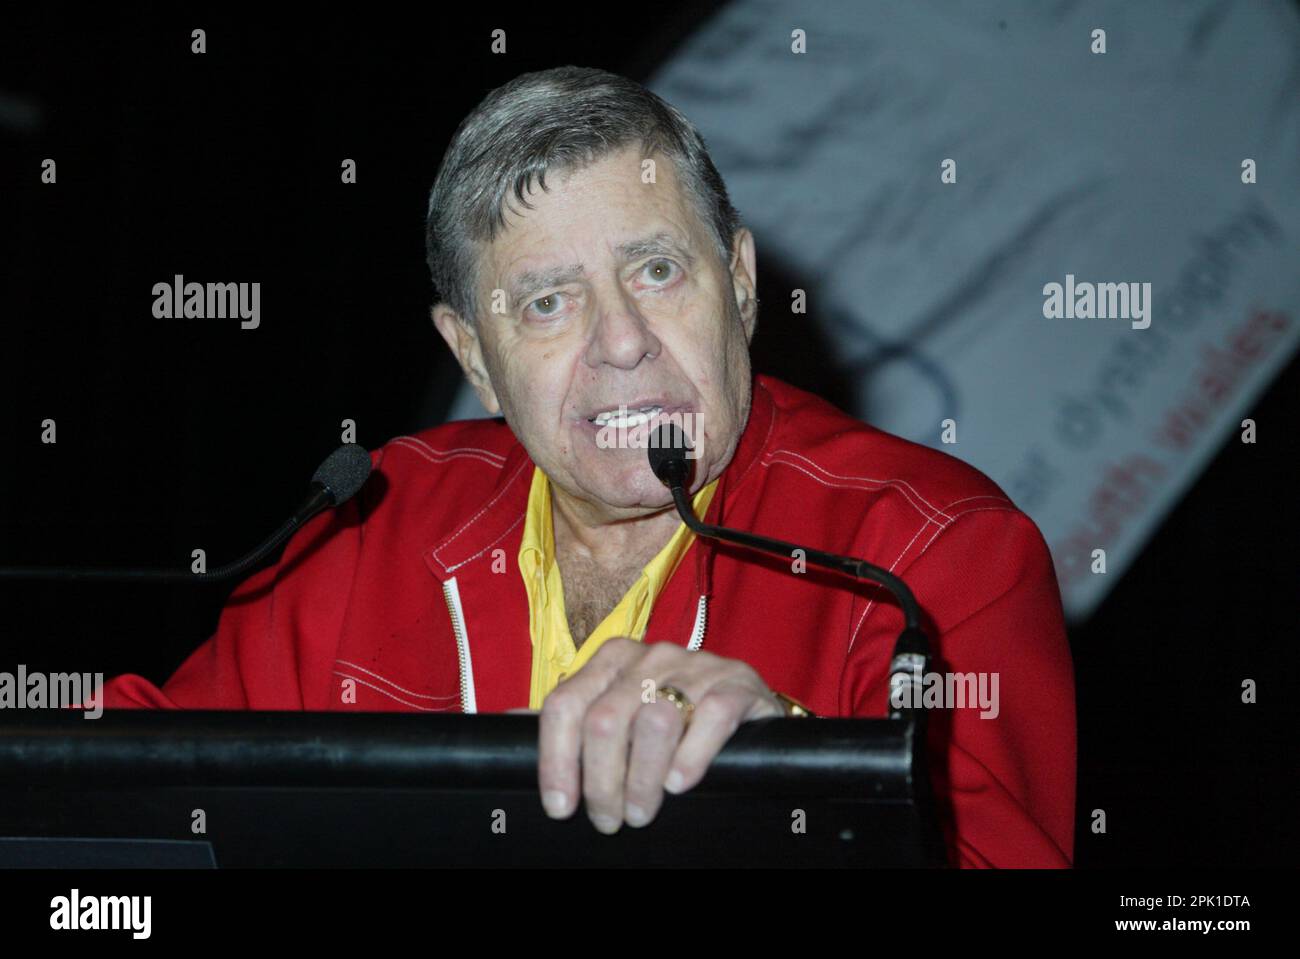 Jerry Lewis  conducts a press conference along with a meet-and-greet with families afflicted by Muscular Dystrophy ahead of his fund-raising 'Laugh For Life' comedy concert being held in Sydney on September 21st. Sydney, Australia - 16.09.09 Stock Photo